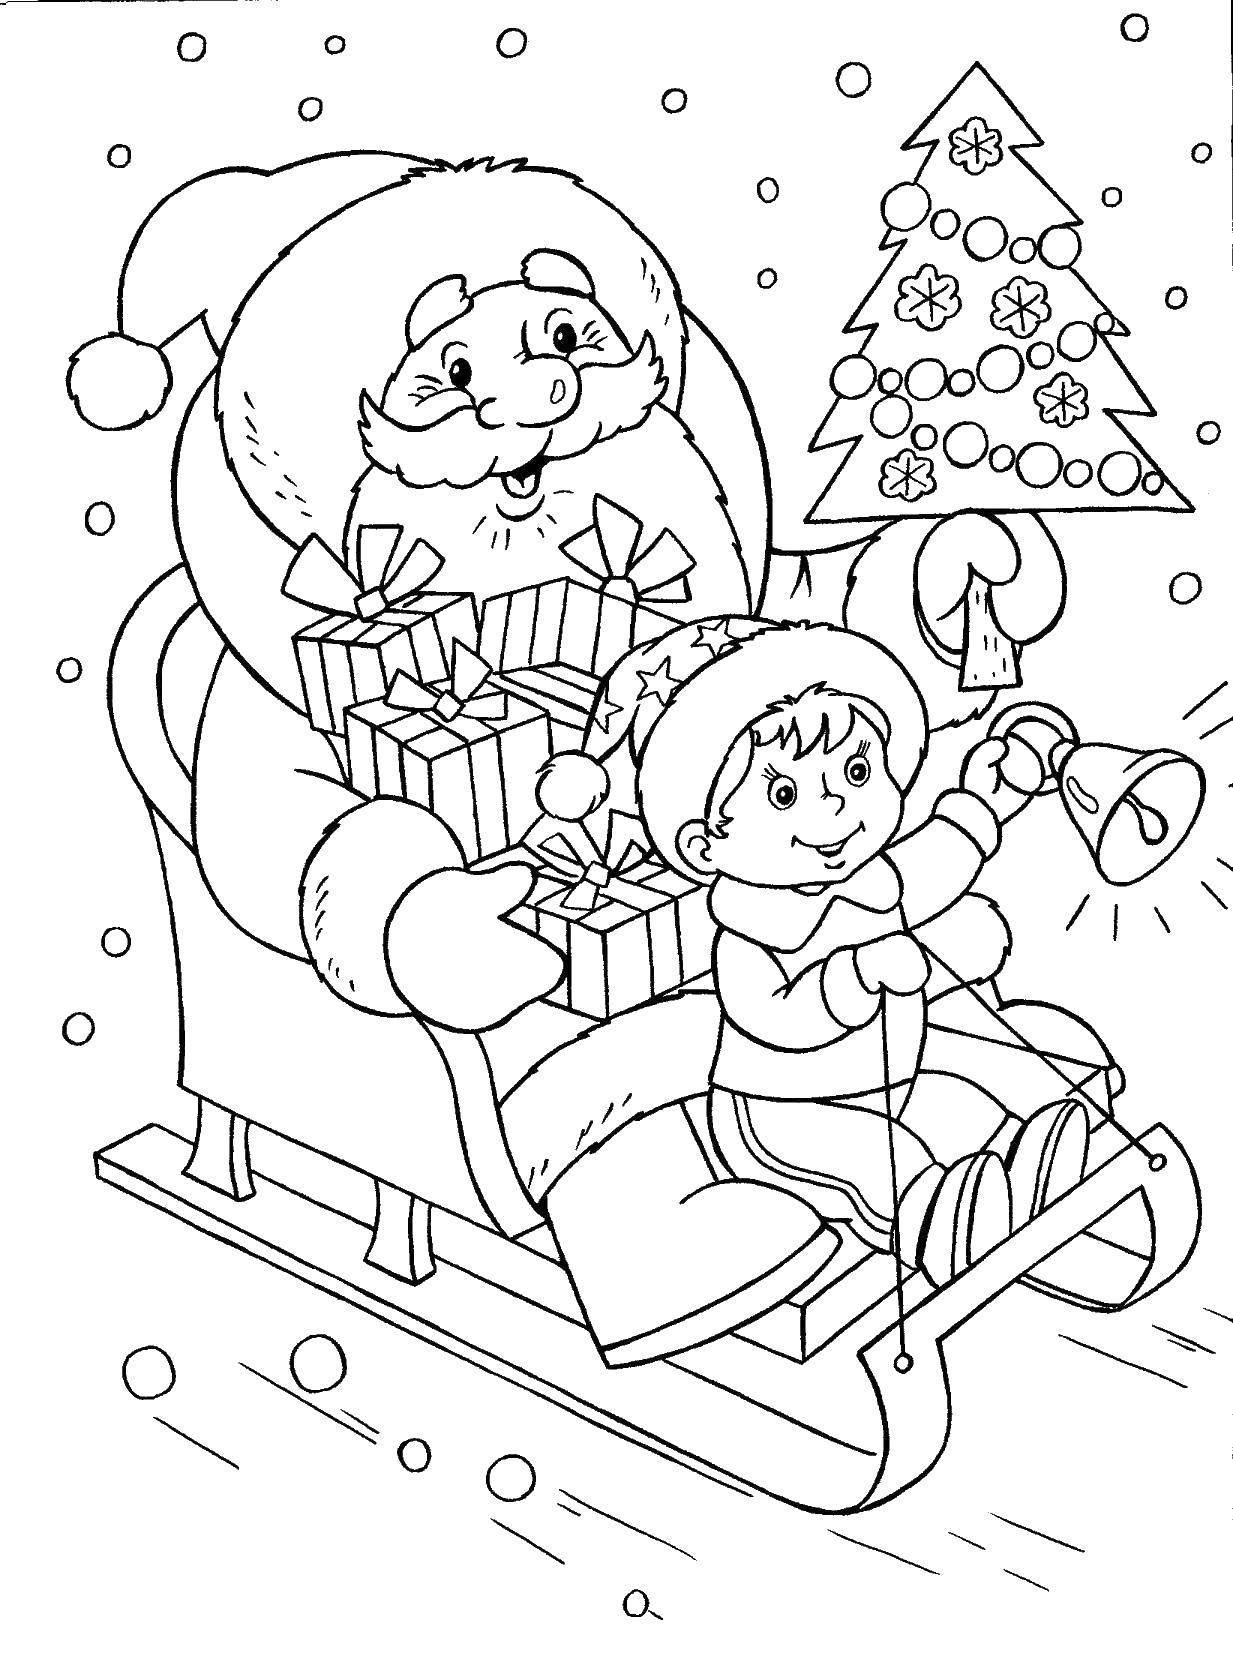 Coloring Santa Claus goes with gifts on sled. Category Santa Claus. Tags:  Santa Claus, gifts.